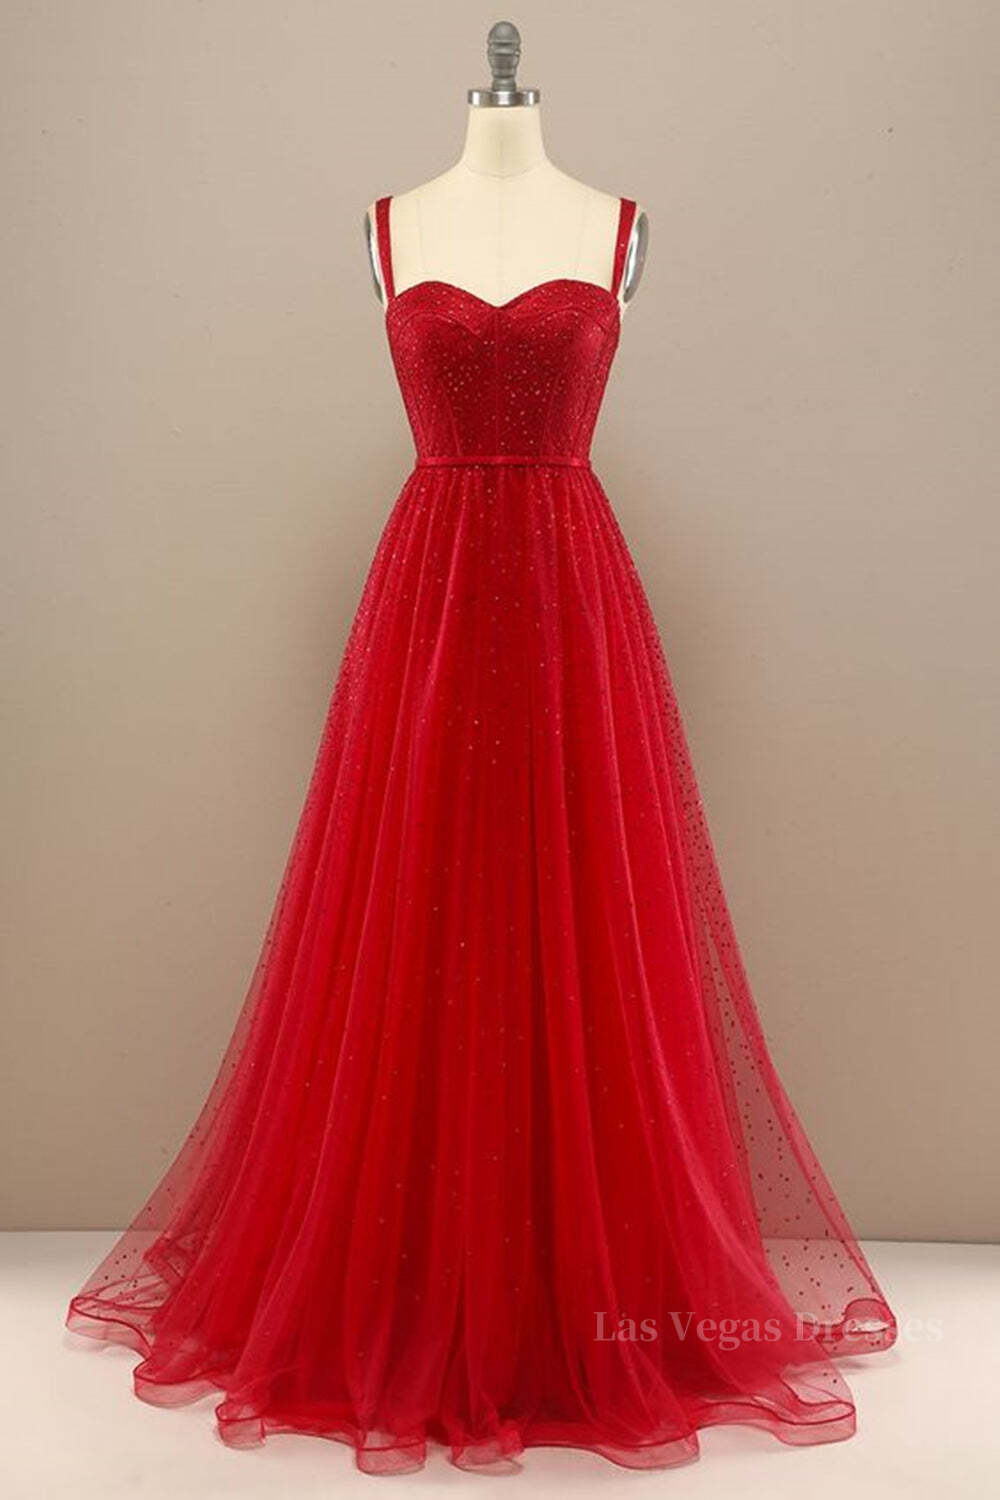 Shiny Sweetheart Neck Red Tulle Beaded Long Prom Dresses, Open Back Red Tulle Formal Graduation Evening Dresses